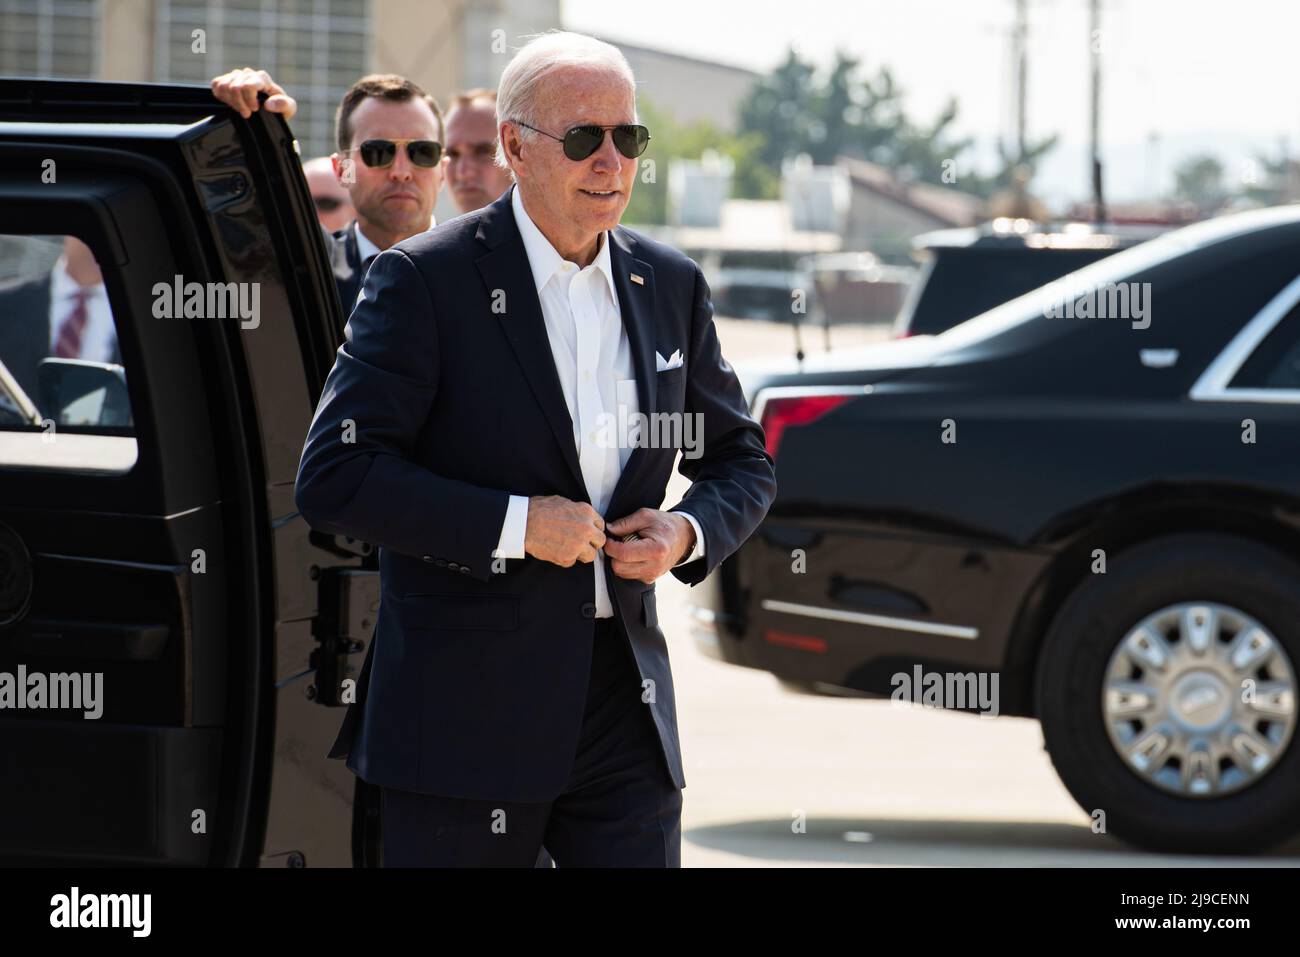 Pyeongtaek, South Korea. 22nd May, 2022. U.S President Joe Biden, arrives at Osan Air Base for departure on Air Force One following his two-day visit to South Korea, May 22, 2022 in Pyeongtaek, South Korea. Credit: SrA Allison Payne/U.S. Air Force/Alamy Live News Stock Photo